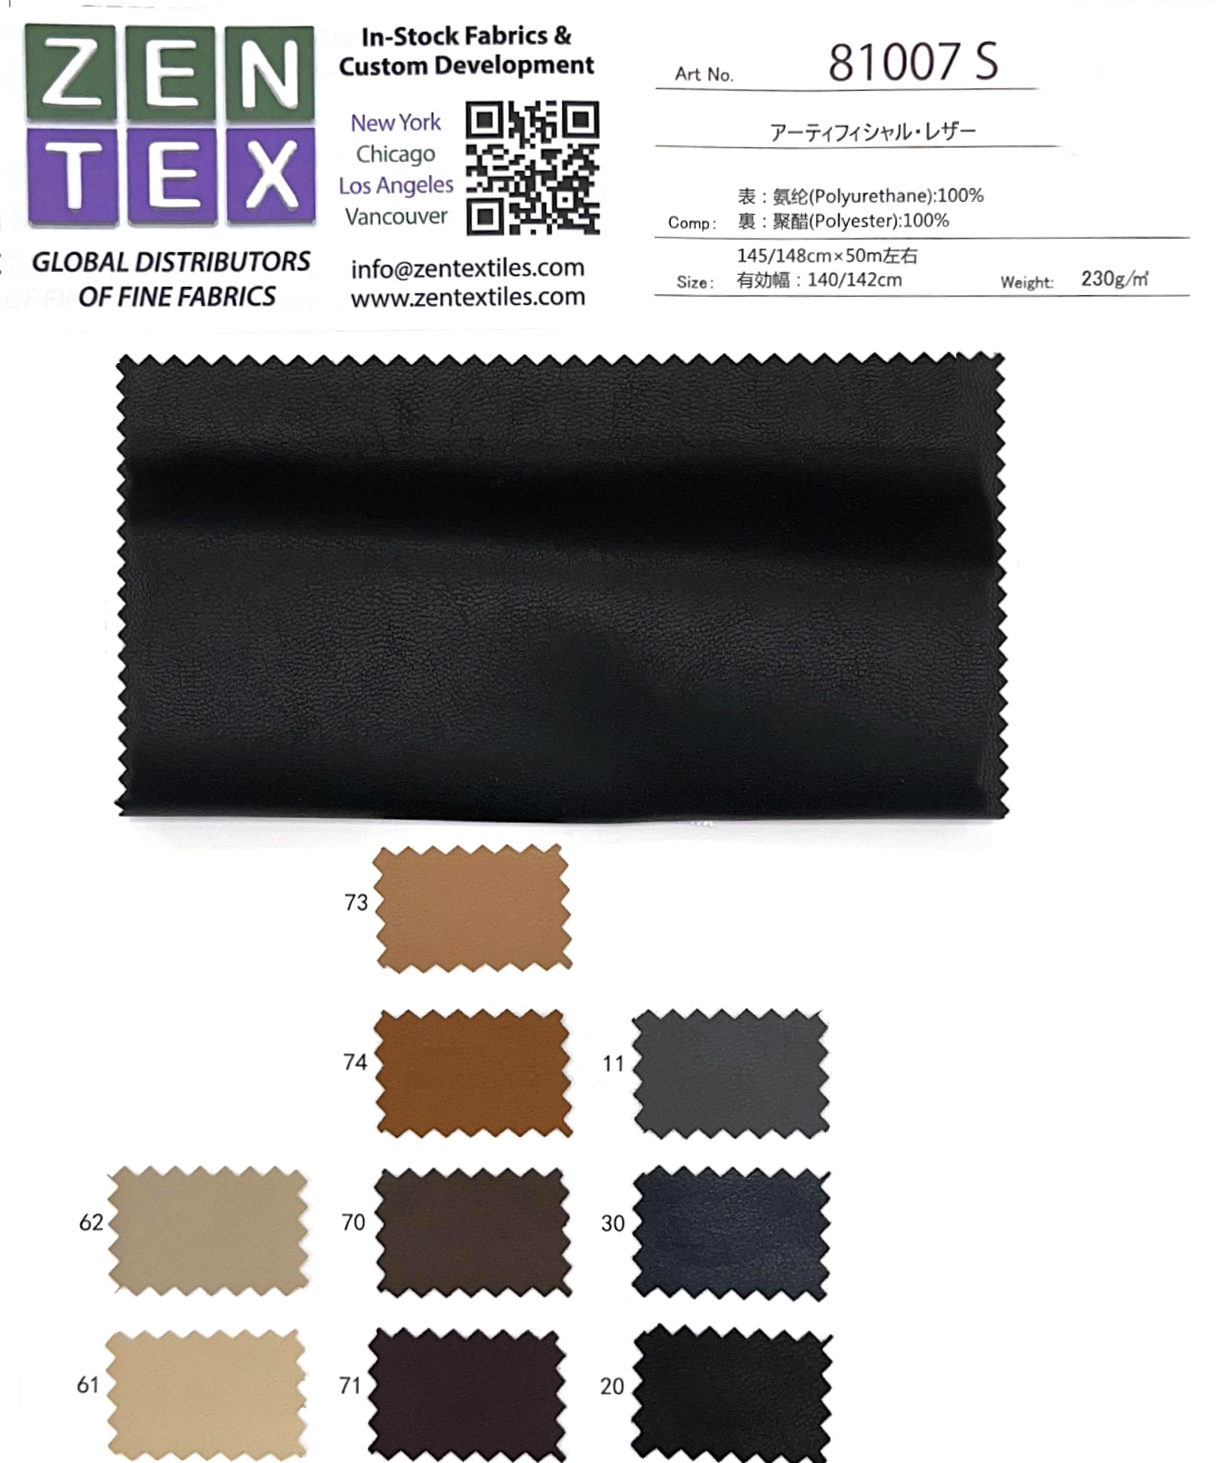 View 100% POLYURETHANE SYNTHETIC LEATHER